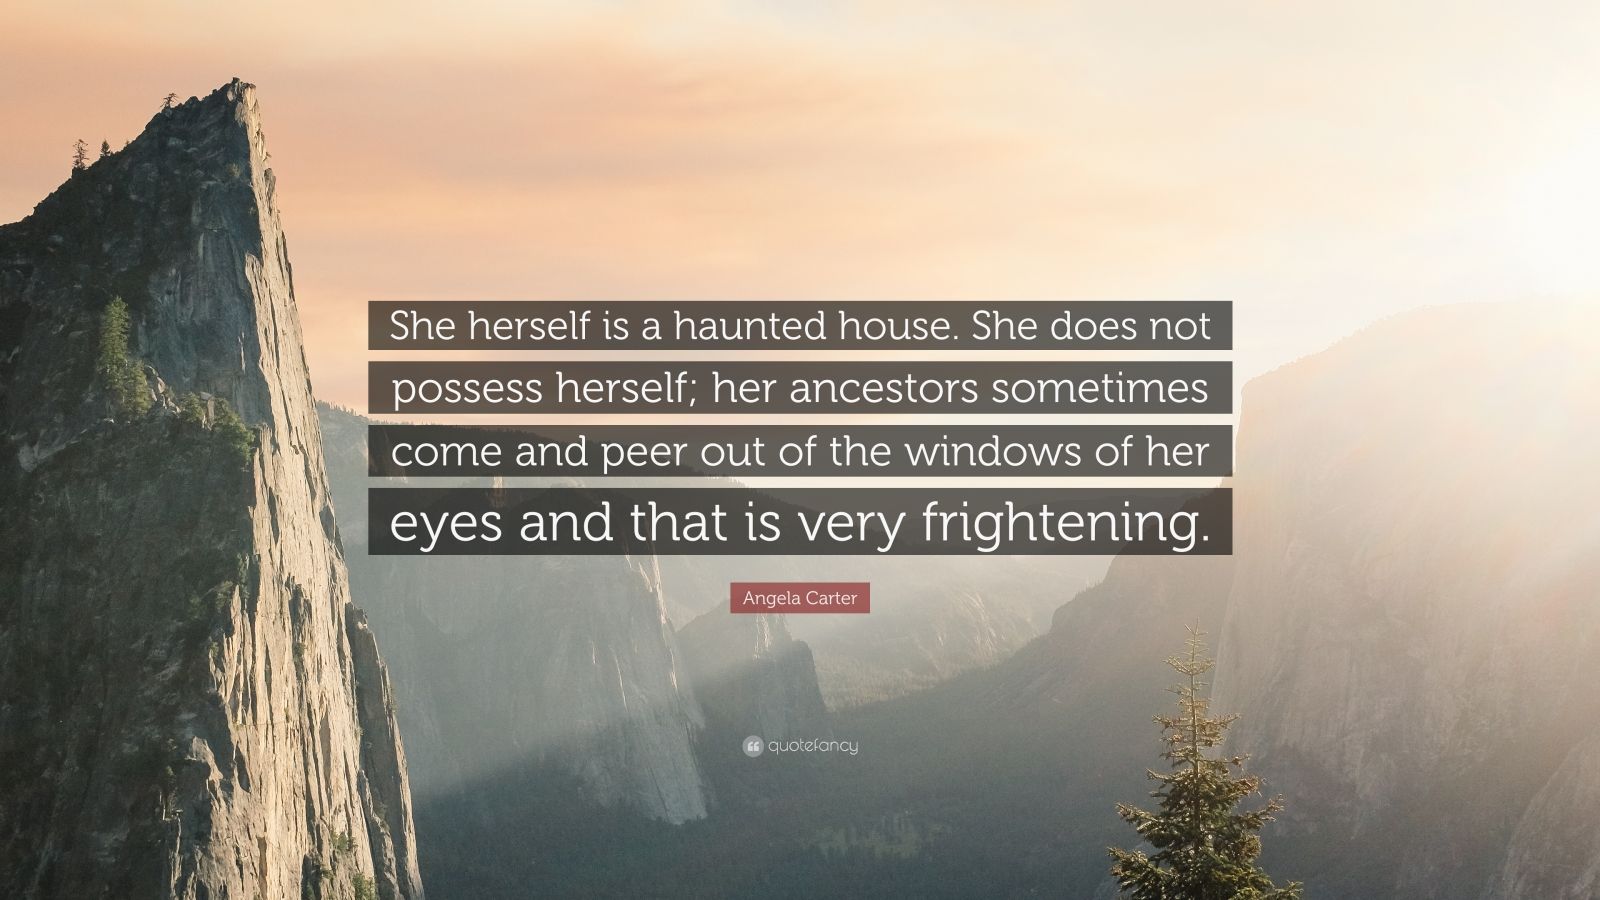 Angela Carter Quote: "She herself is a haunted house. She does not possess herself; her ...